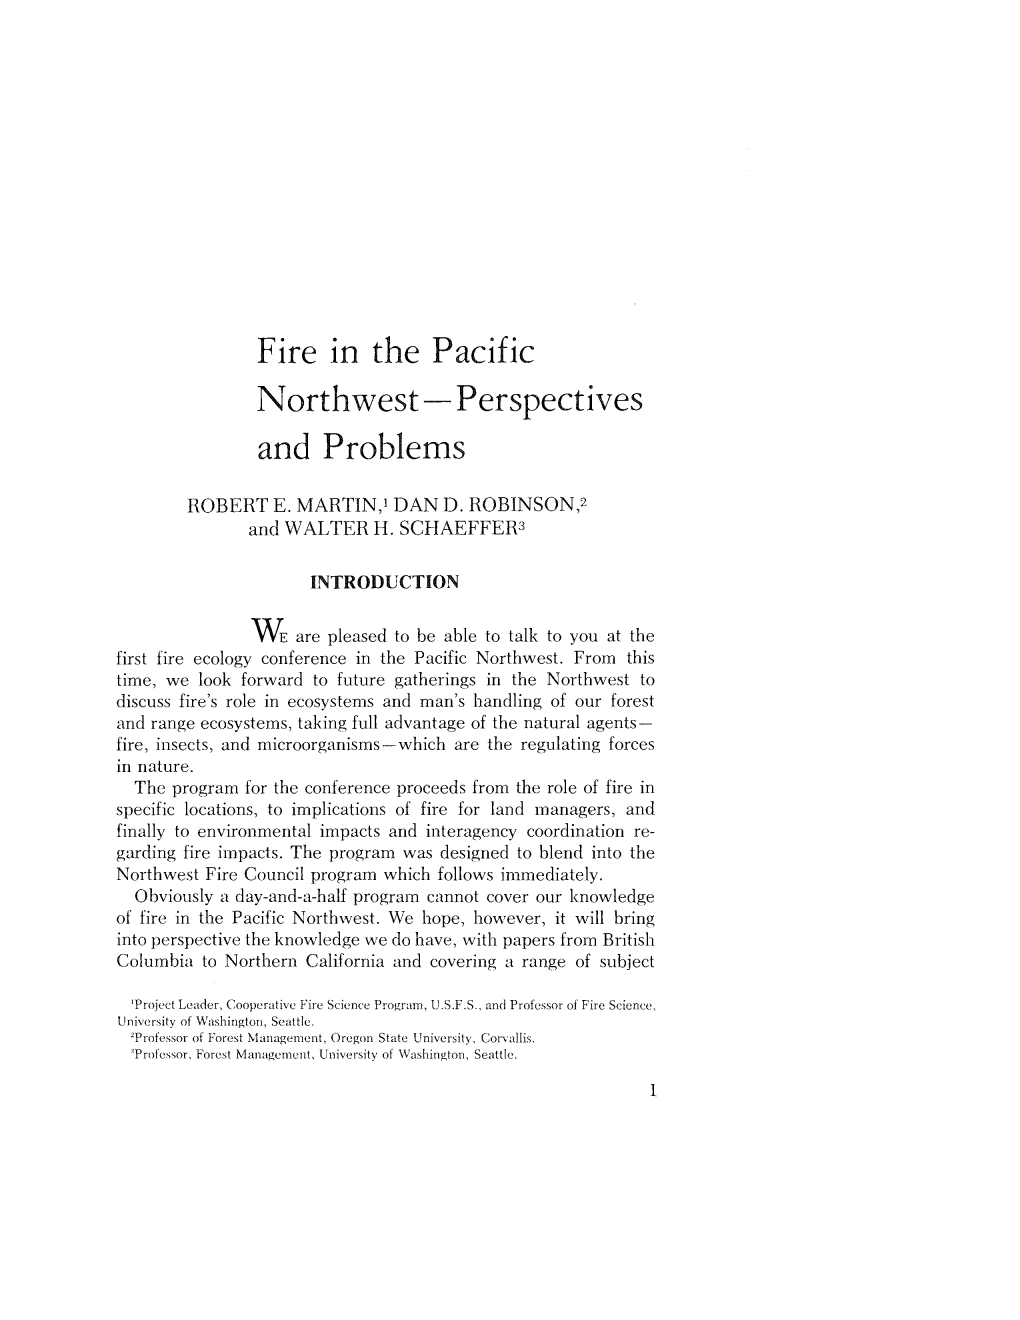 Fire in the Pacific Northwest-Perspectives and Problems